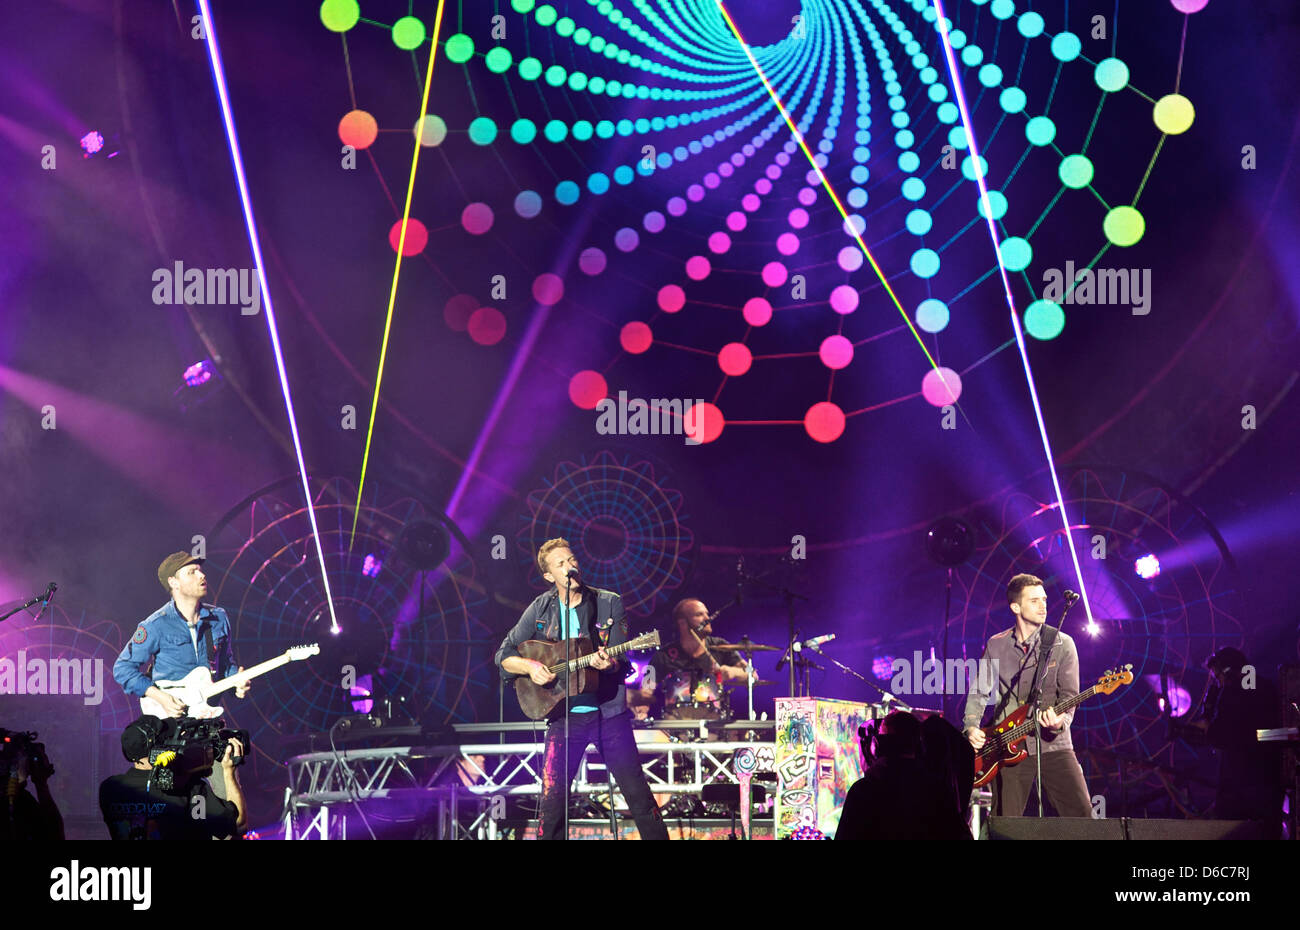 British rock band Coldplay performs during their Mylo Xyloto Tour at the Rheinenergie Stadion in Cologne, Germany, 4 September 2012. Photo: Wolfgang Heisel Stock Photo